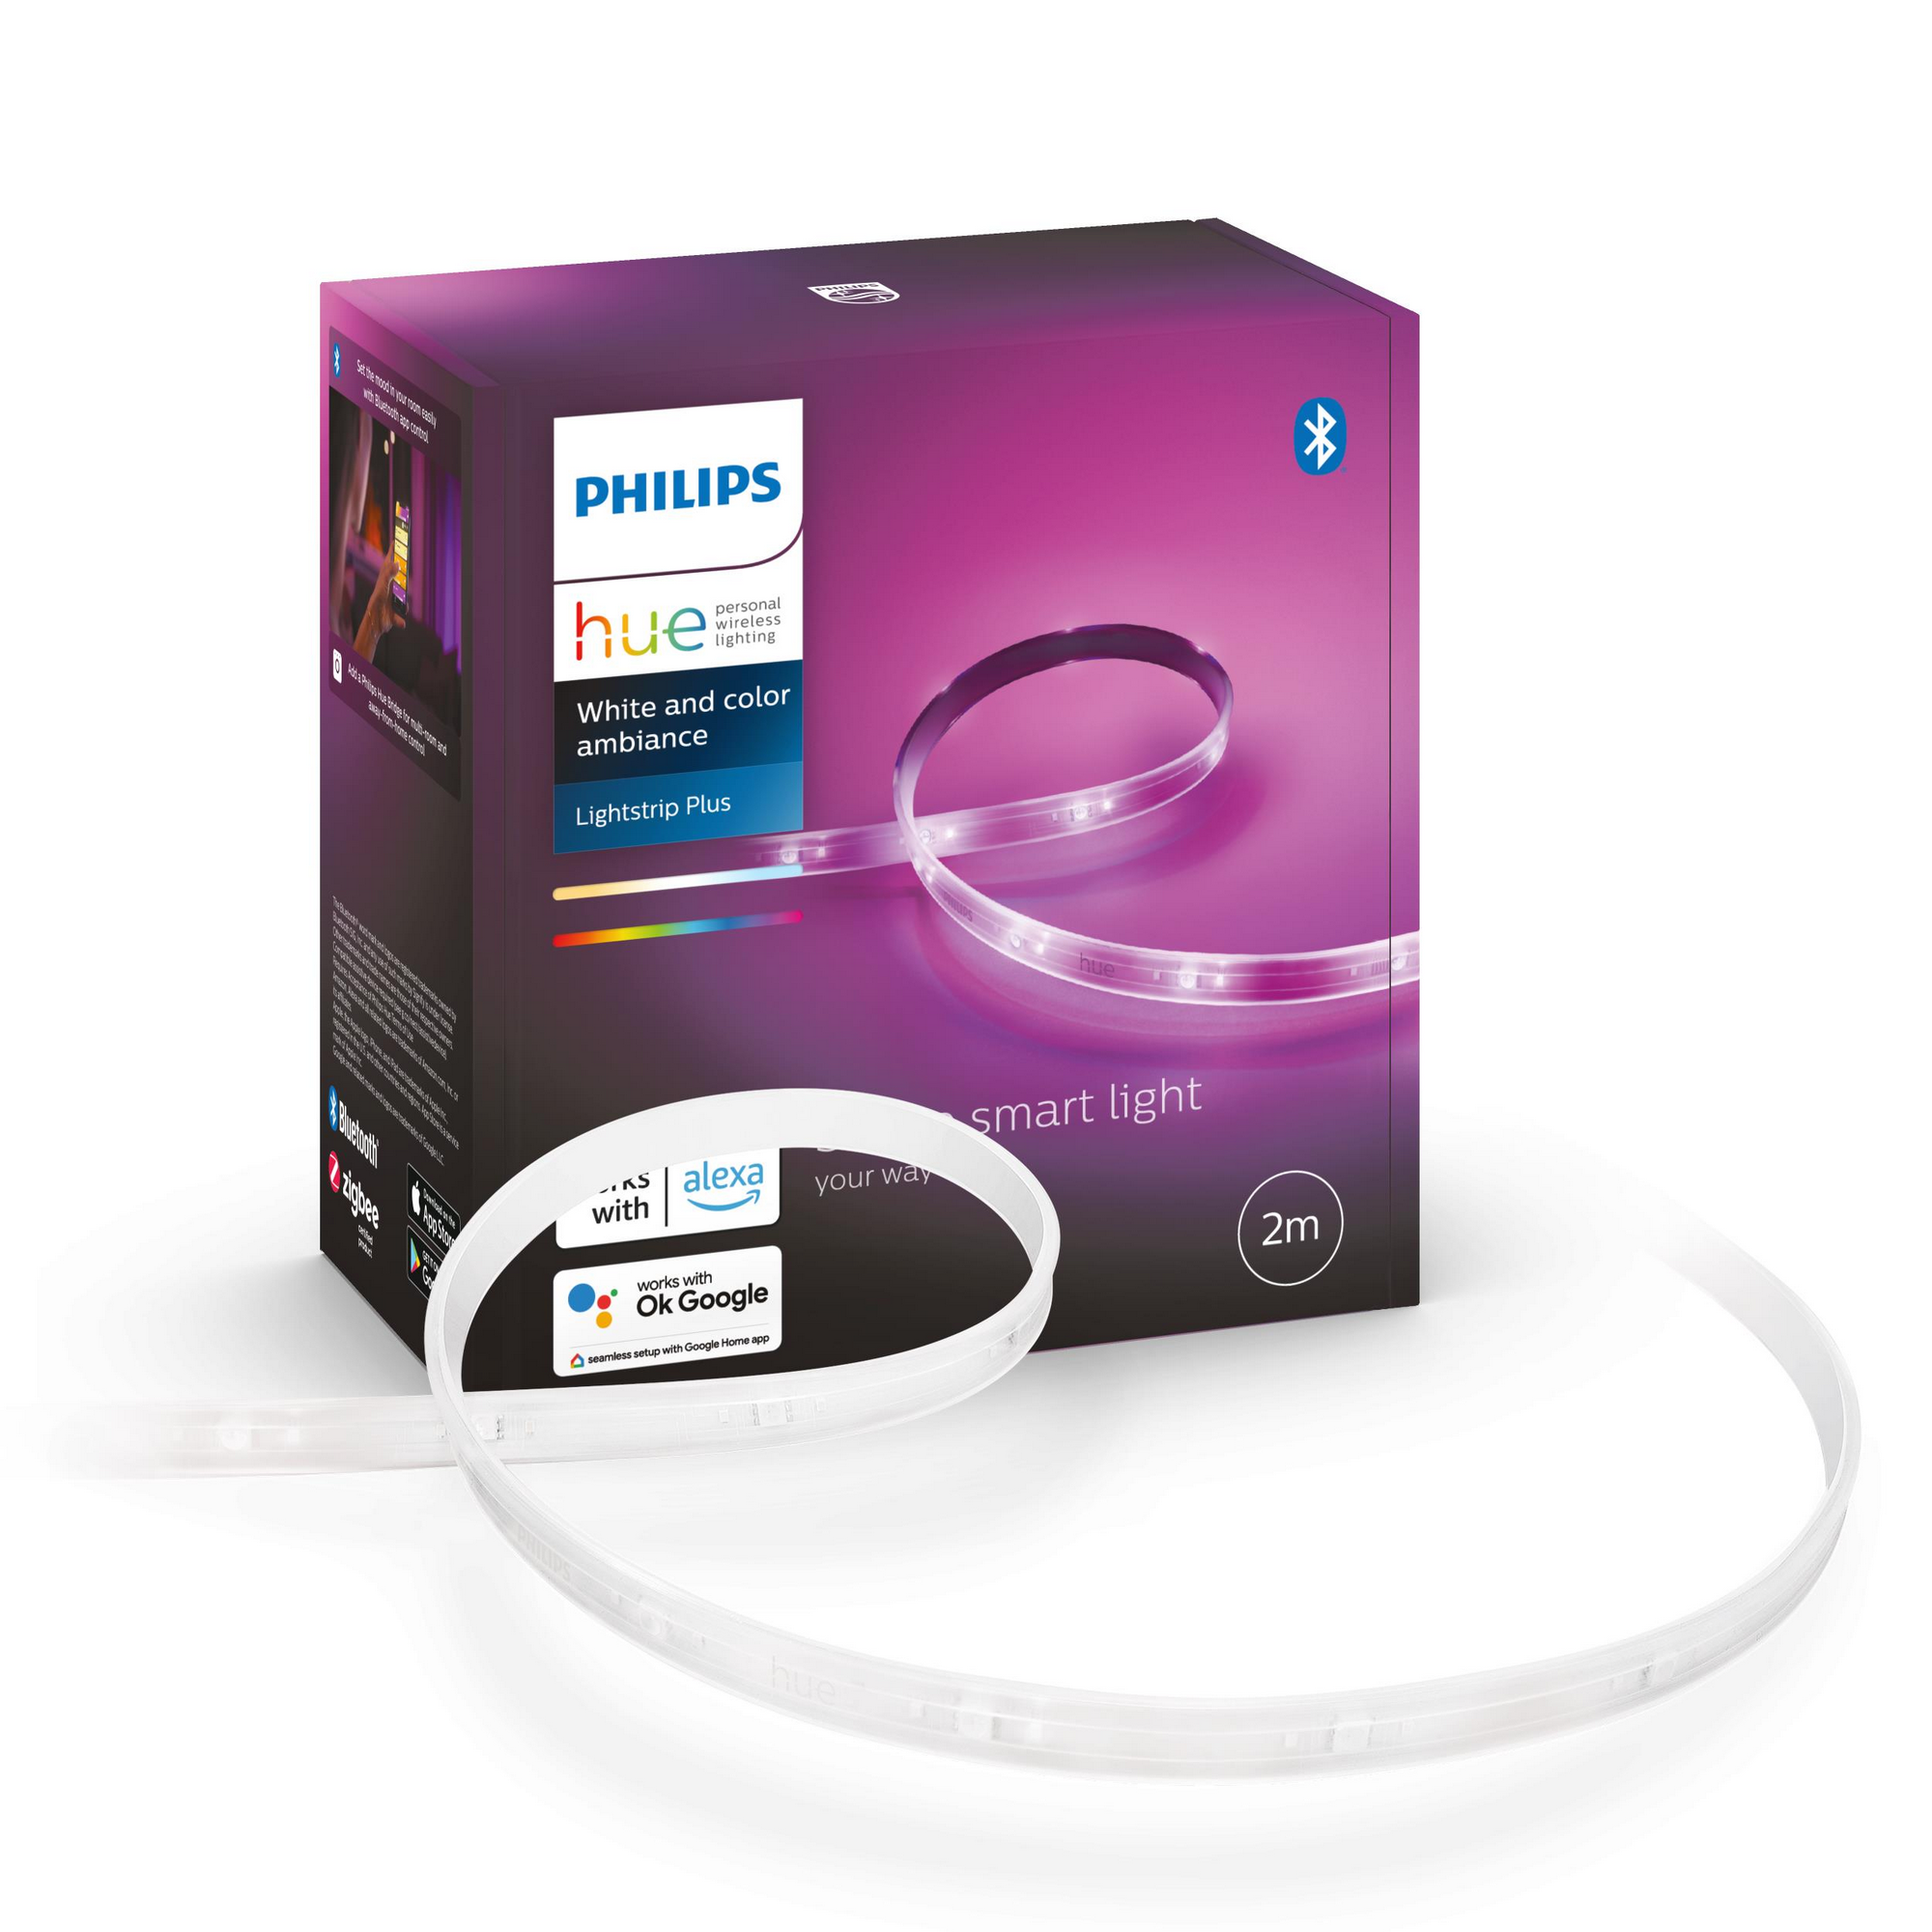 LED-Lightstrip Plus 'Hue White Color & Ambiance' Basis 2 m 1600 lm inkl. Netzteil + product picture